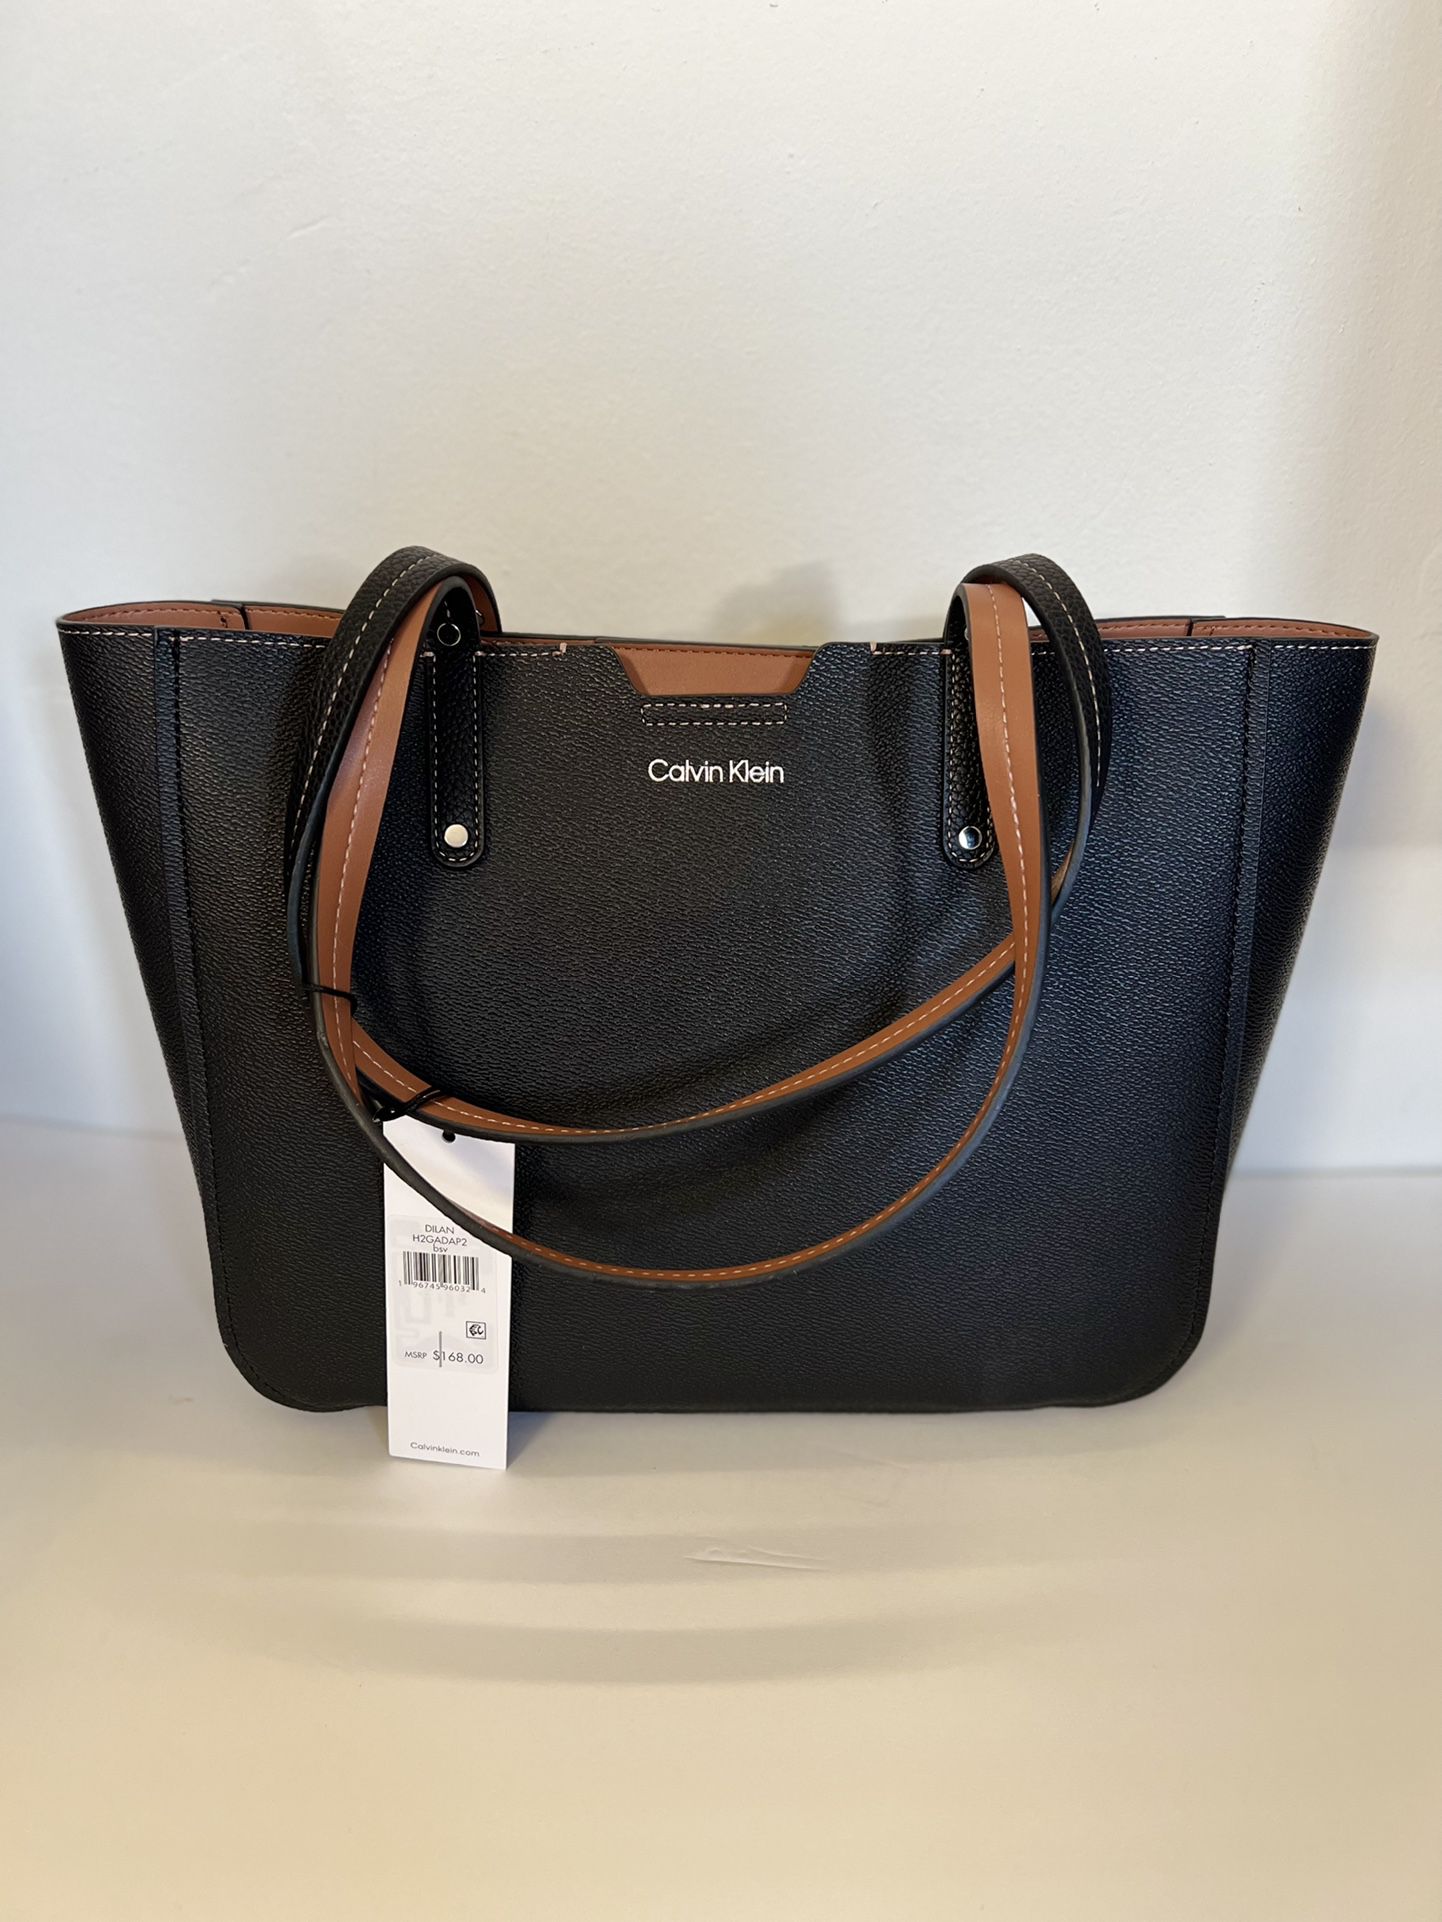 Calvin Klein monogram large tote with chain strap